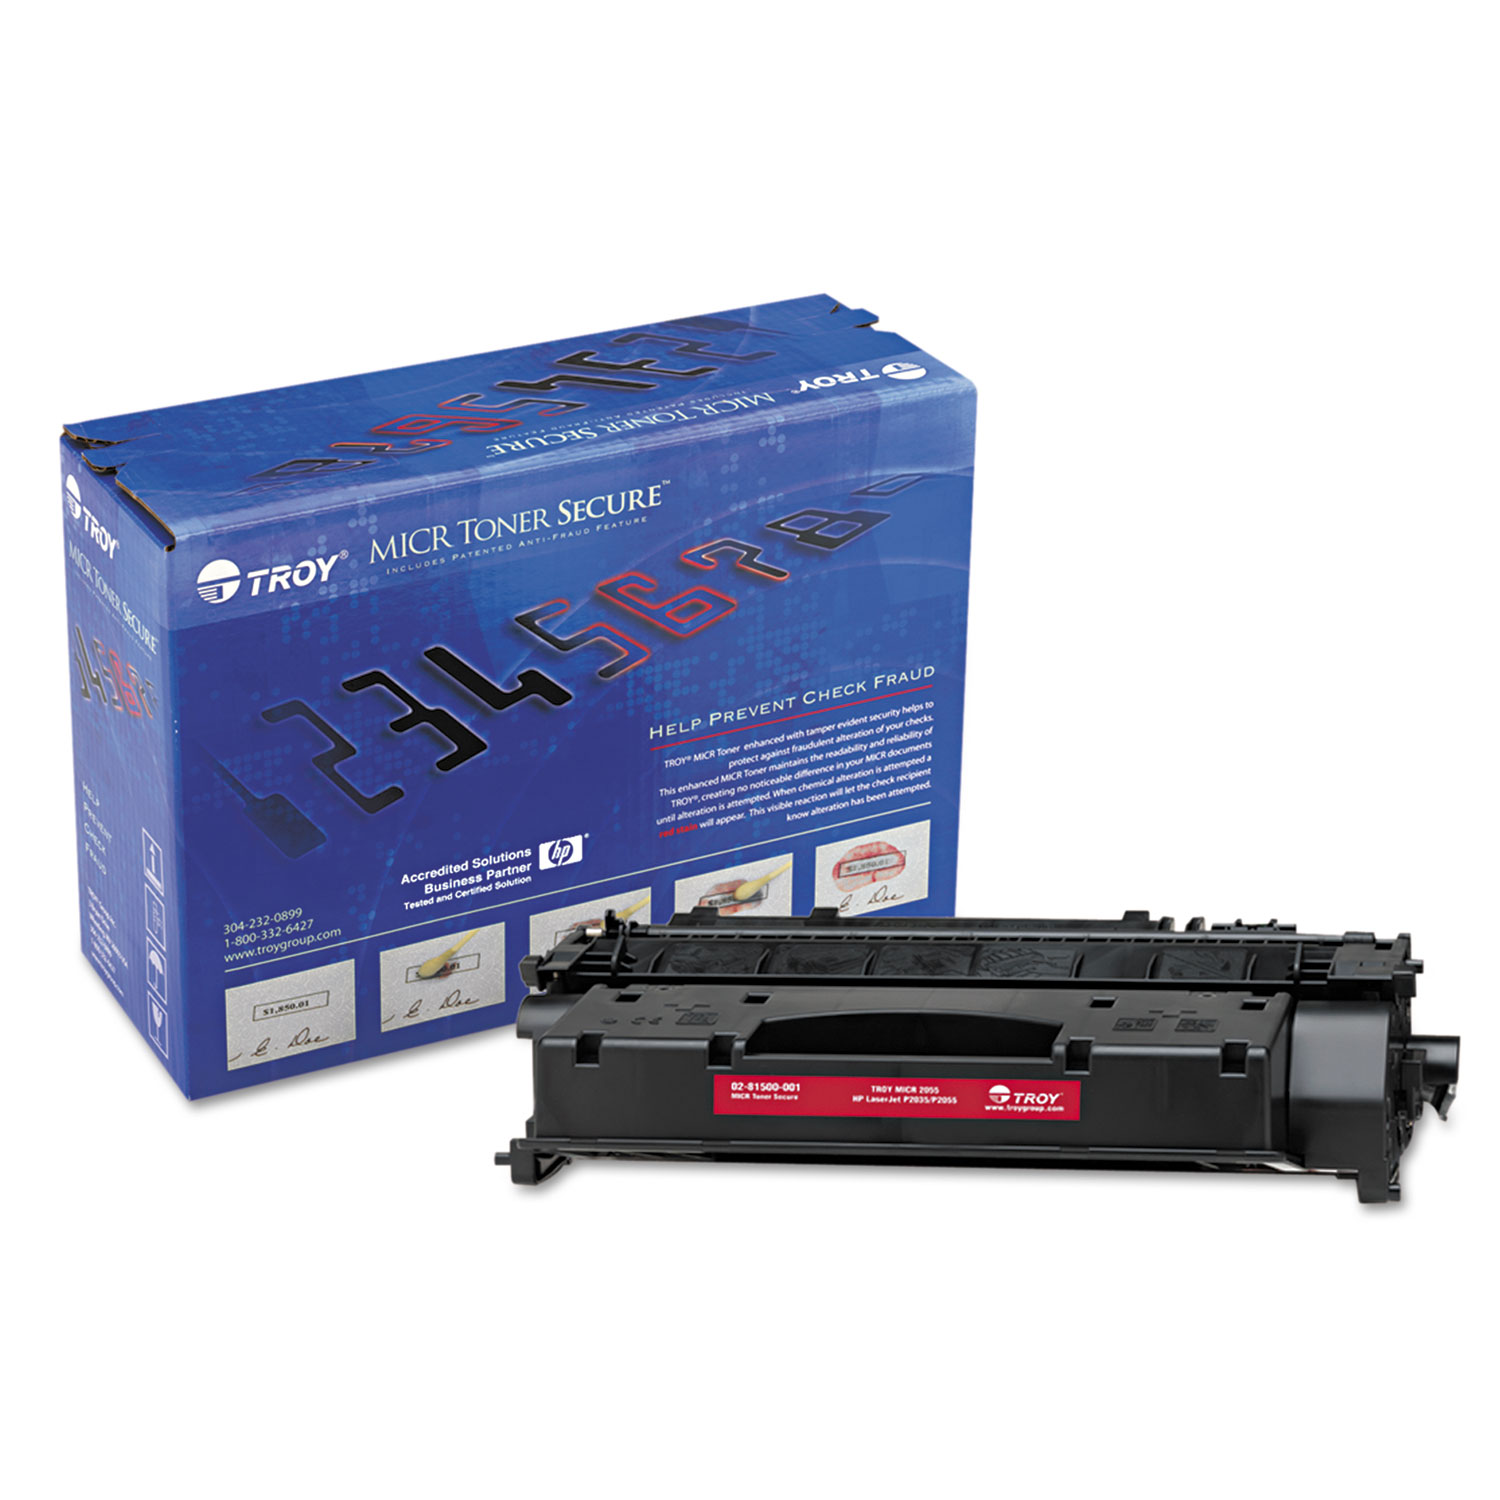 0281501001 05X (HP CE505X) High-Yield MICR Toner Secure, 6500 Page-Yield, Black